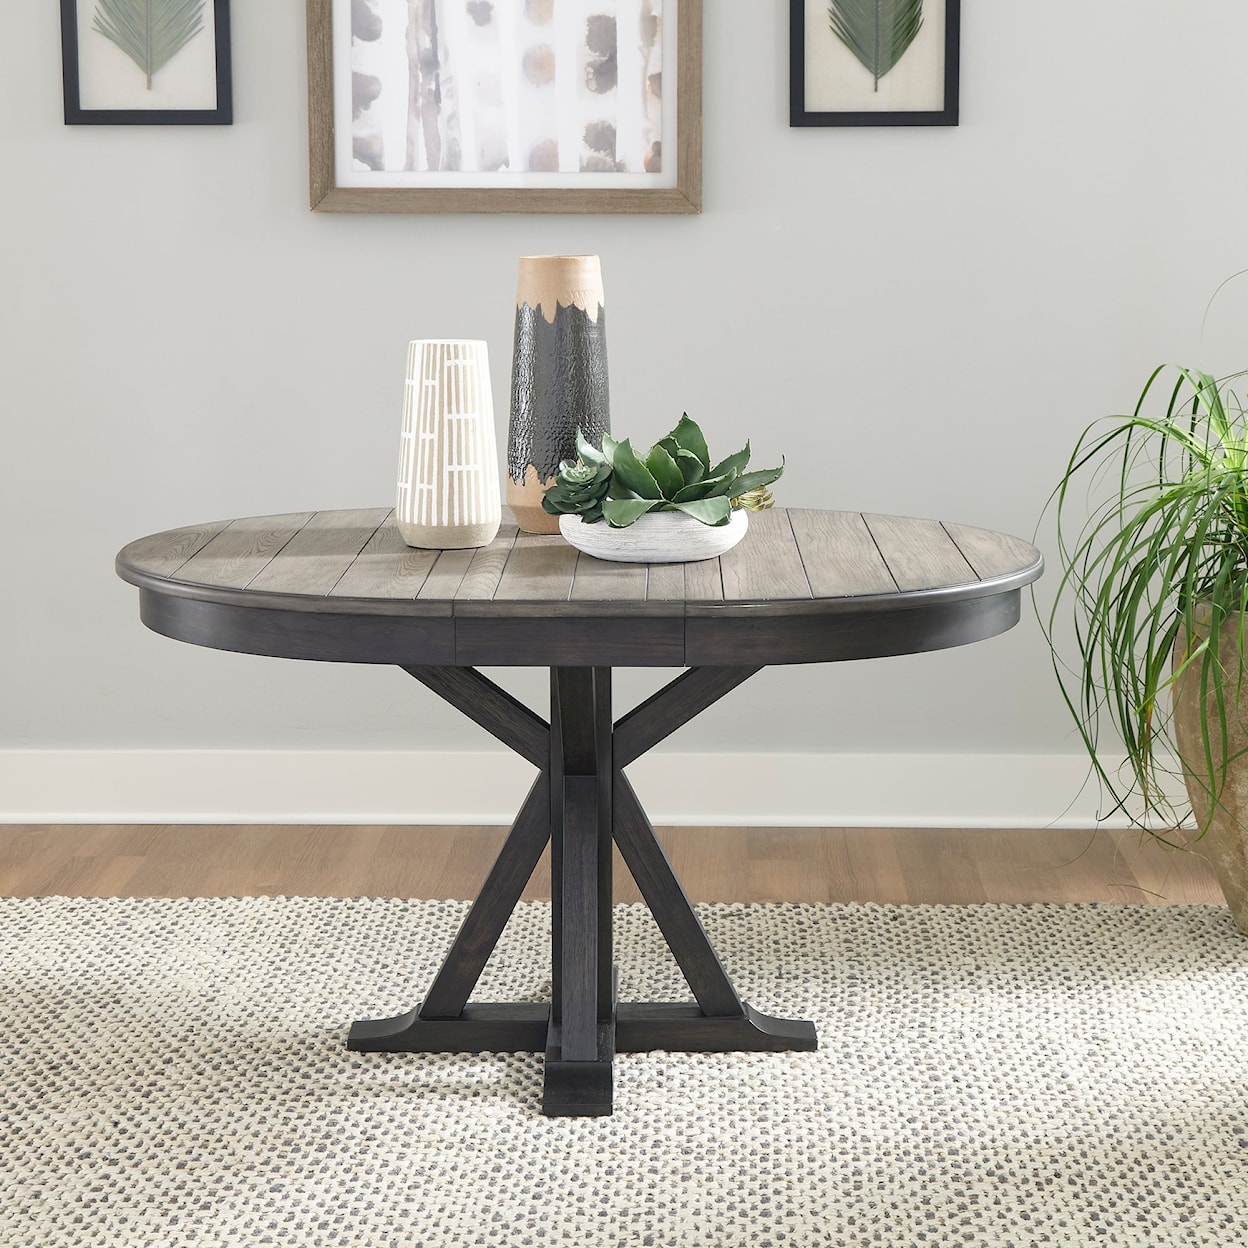 Freedom Furniture Allyson Park Round Dining Room Table